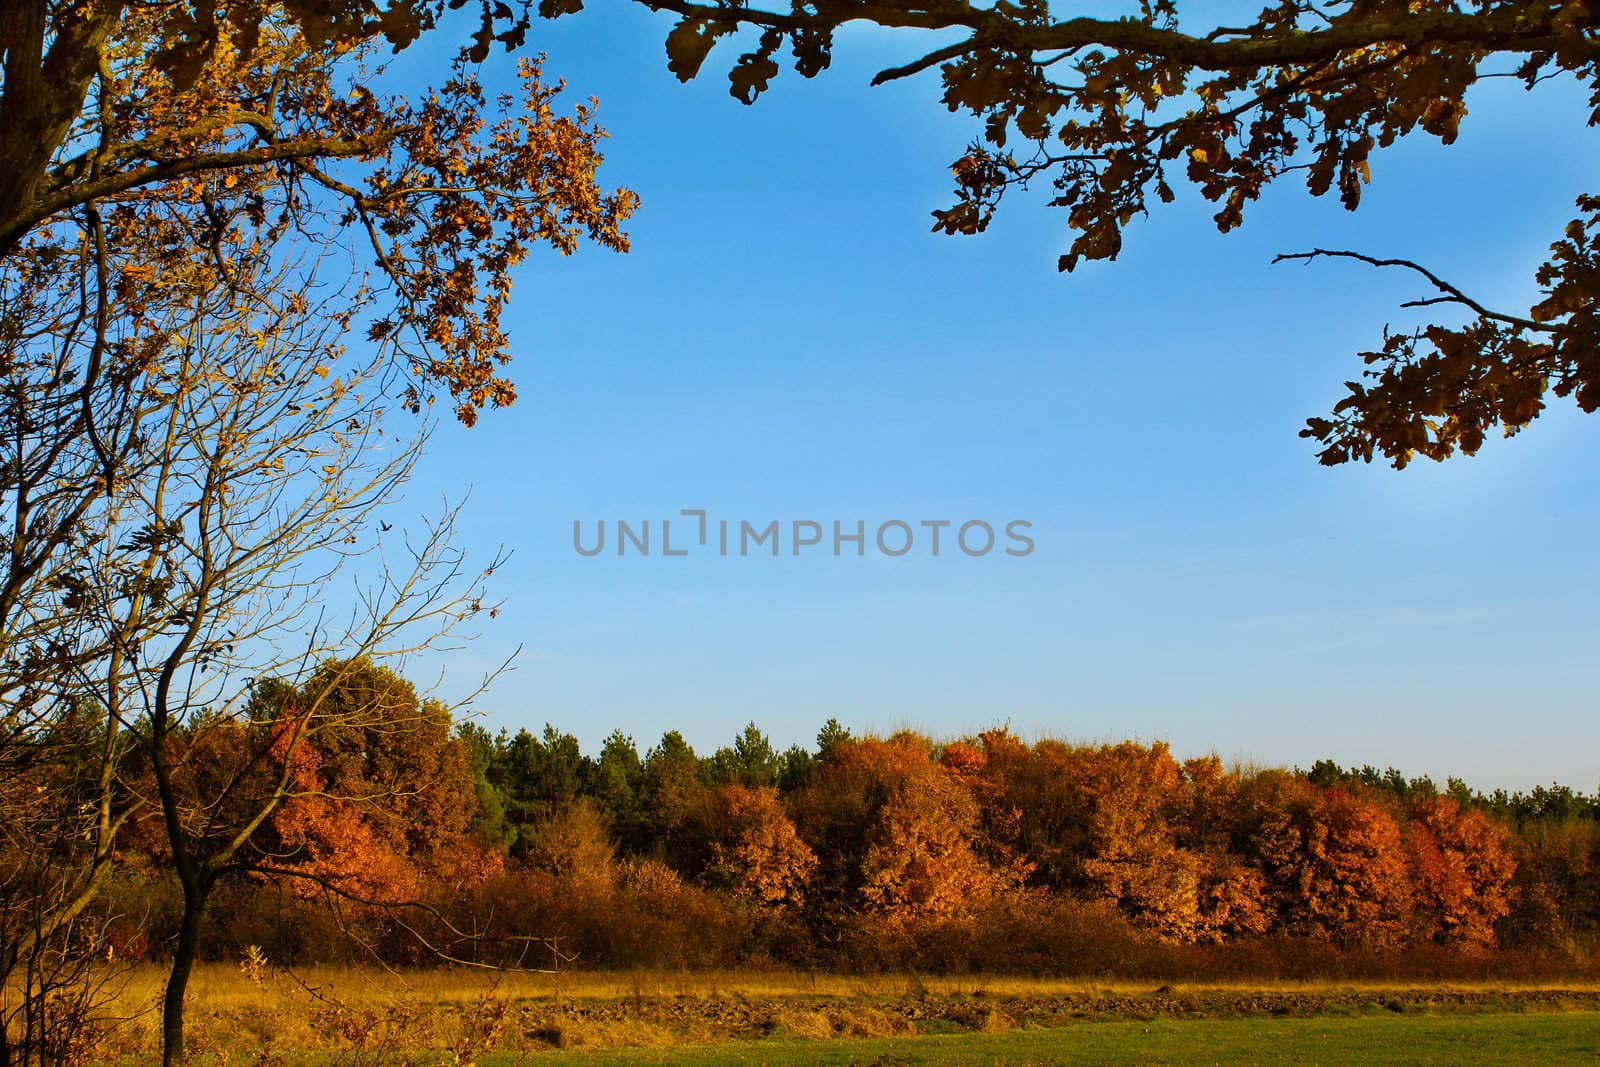 Forest land in autumn colors. In the foreground branches of oak and other trees